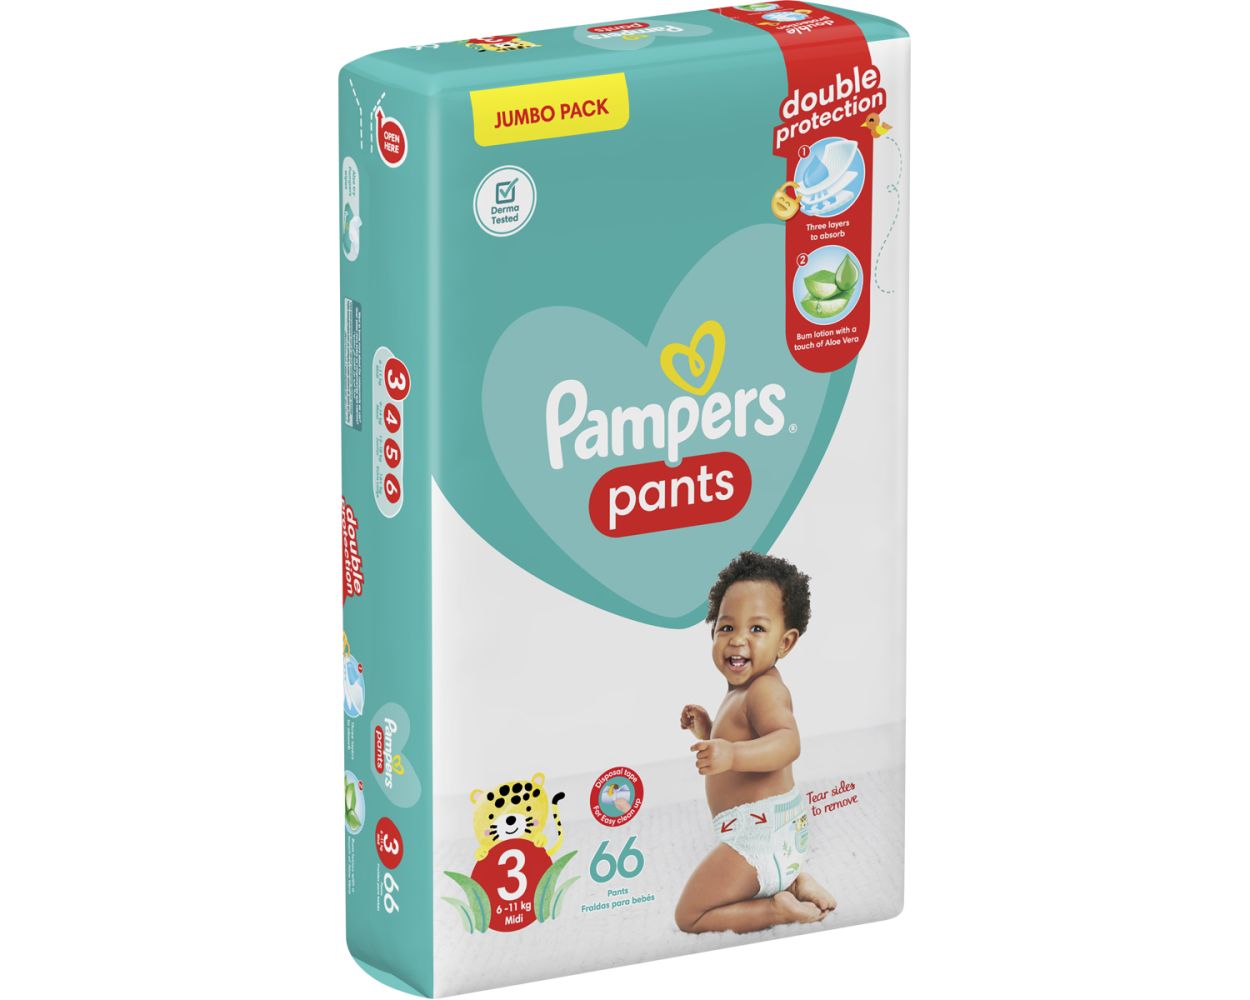 Amazon Quiz : Which of the below diapers have been Voted #1 Softest by moms?